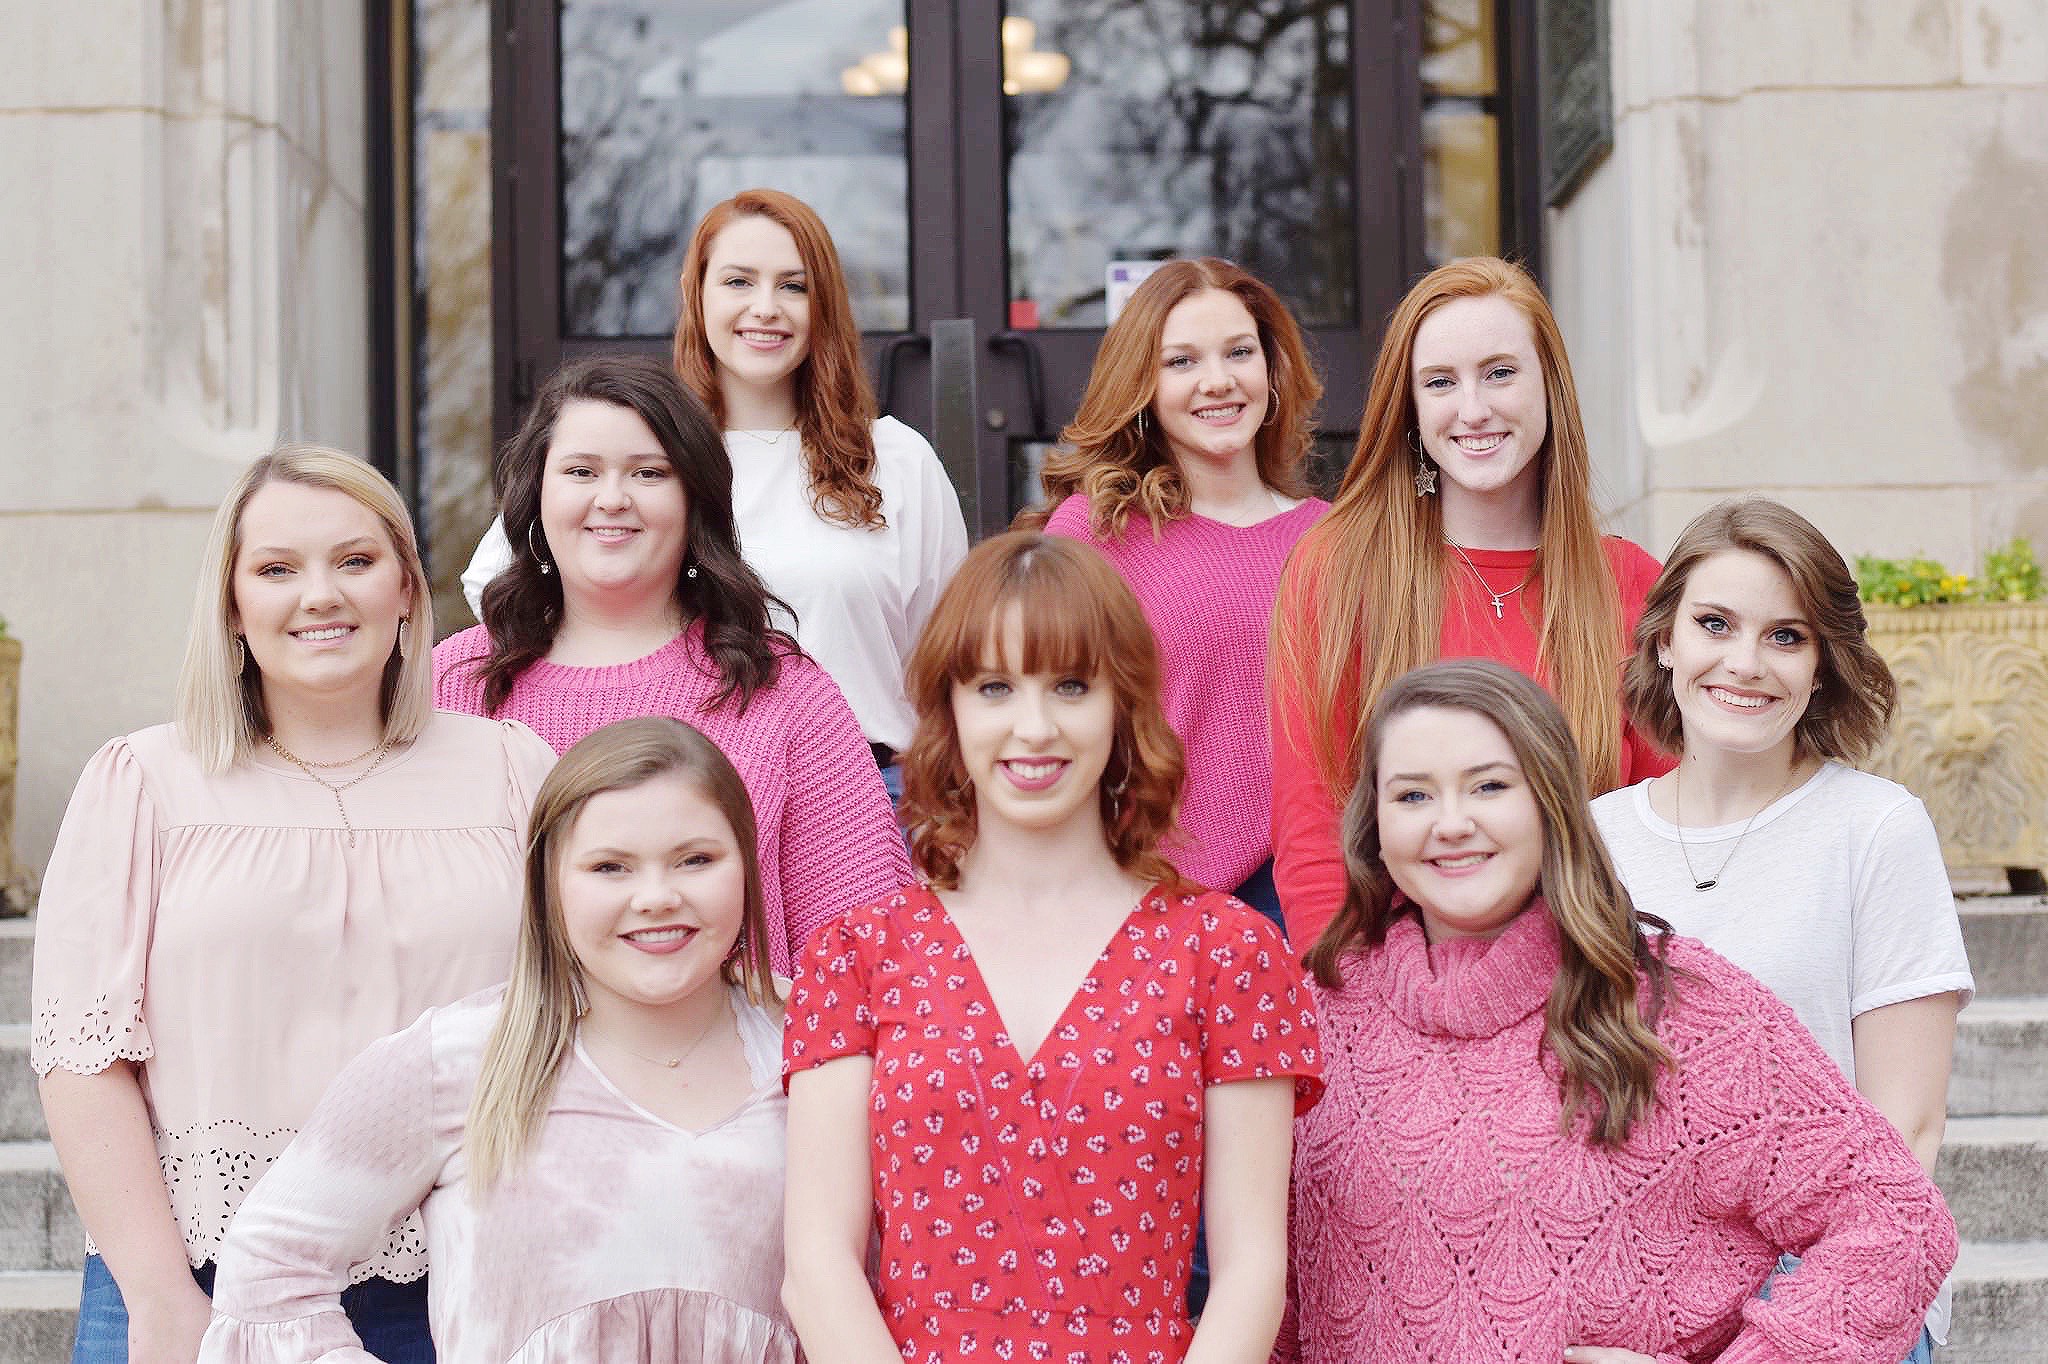 Alpha Delta Pi sorority executive officers pose for a photo